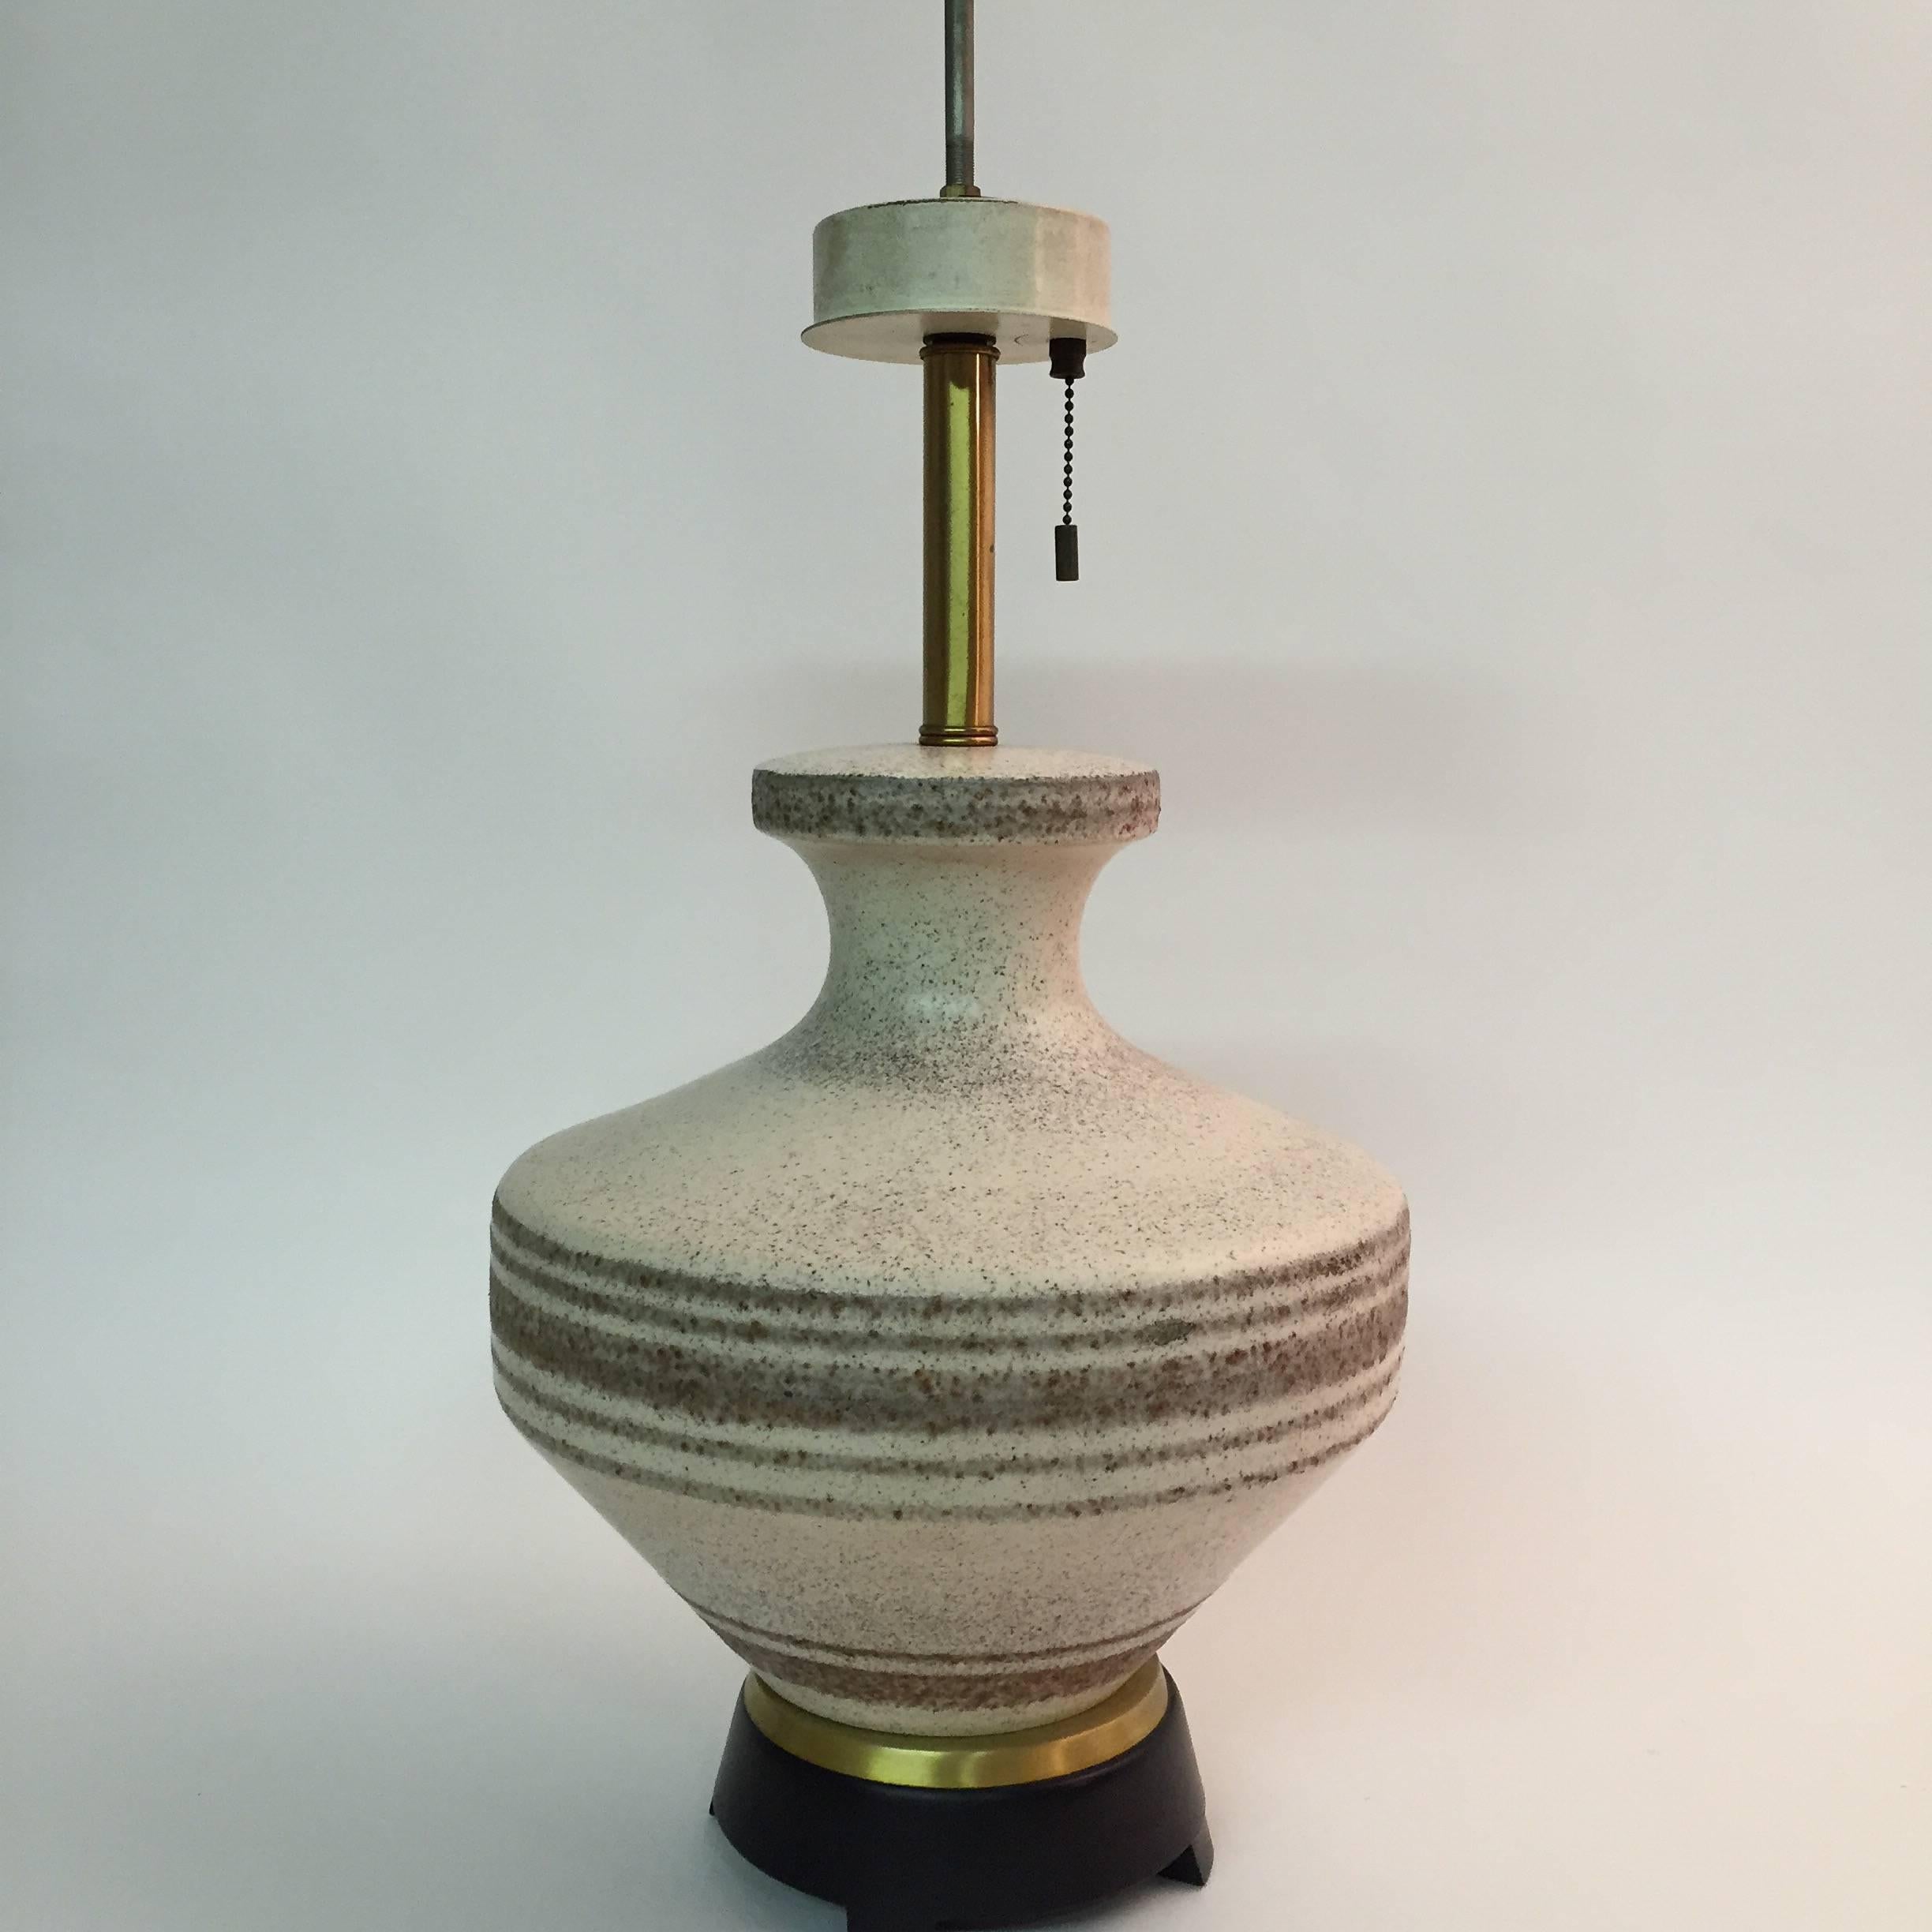 Excellent matte glazed pottery lamp designed by Gerald Thurston for Lightolier. Speckled glaze and hoop decoration. Black matte with brass accent base. Unsigned. The ceramic base measures approximately 12